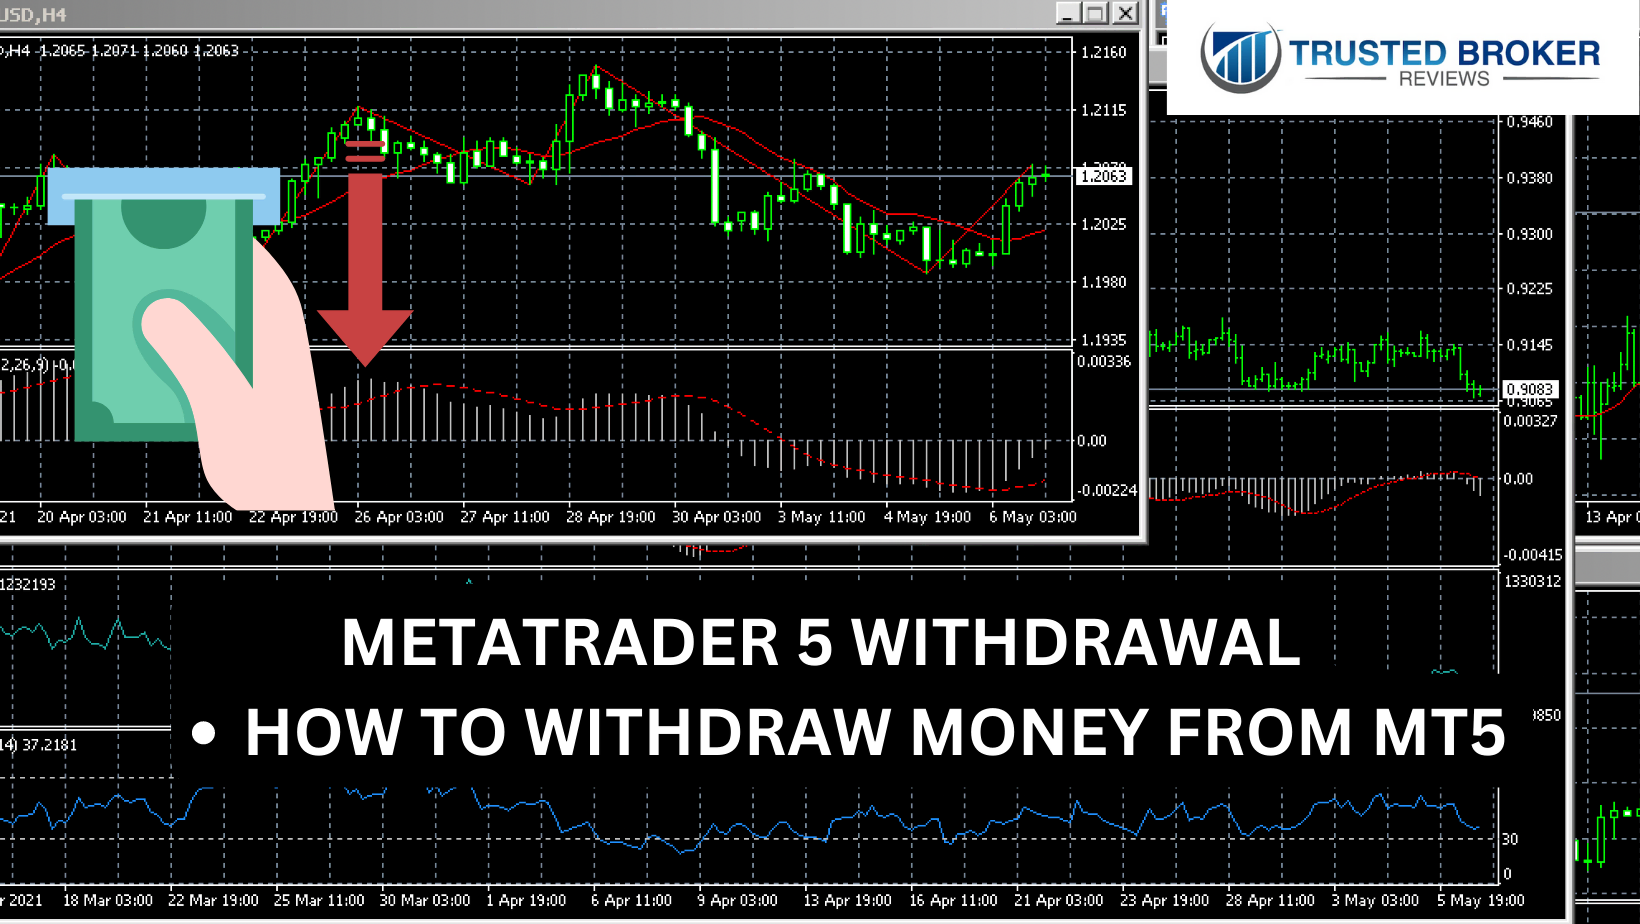 MetaTrader 5 withdrawal: How to withdraw money from MT5?